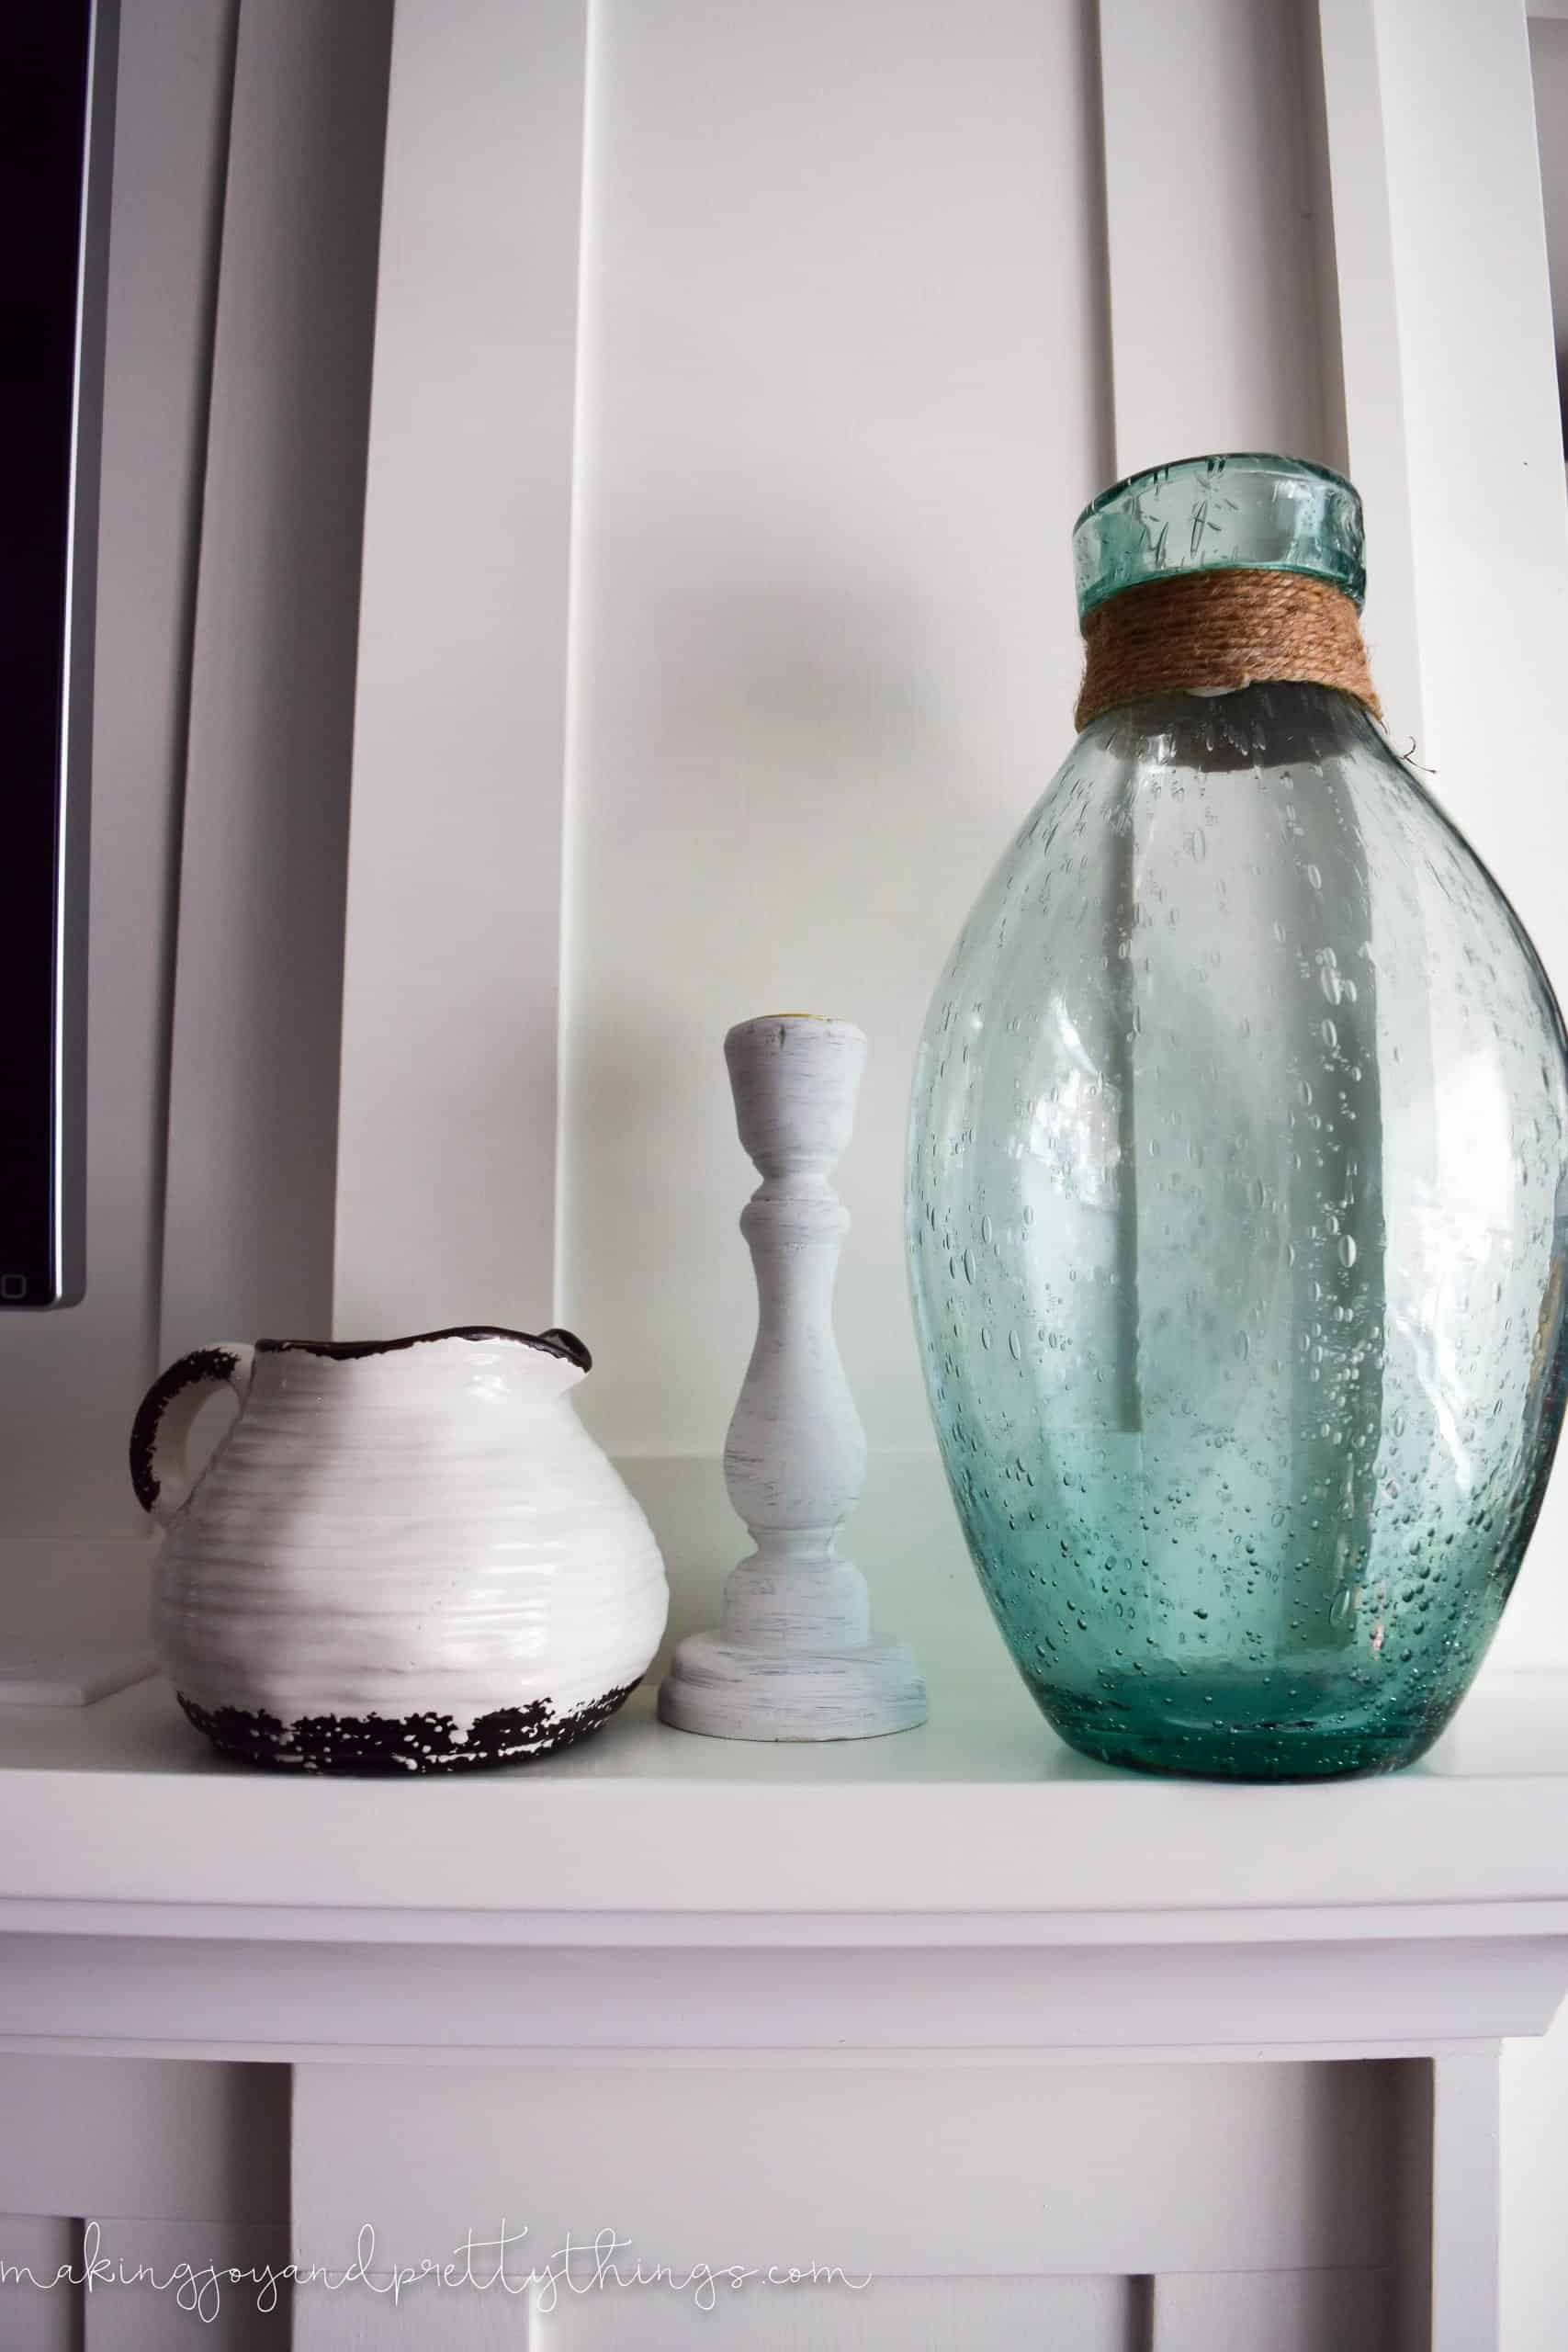 Some summer mantle decor pieces: a blue ombre seaglass vase wrapped with jute string, a rustic white candle holder, and black and white ceramic jug.